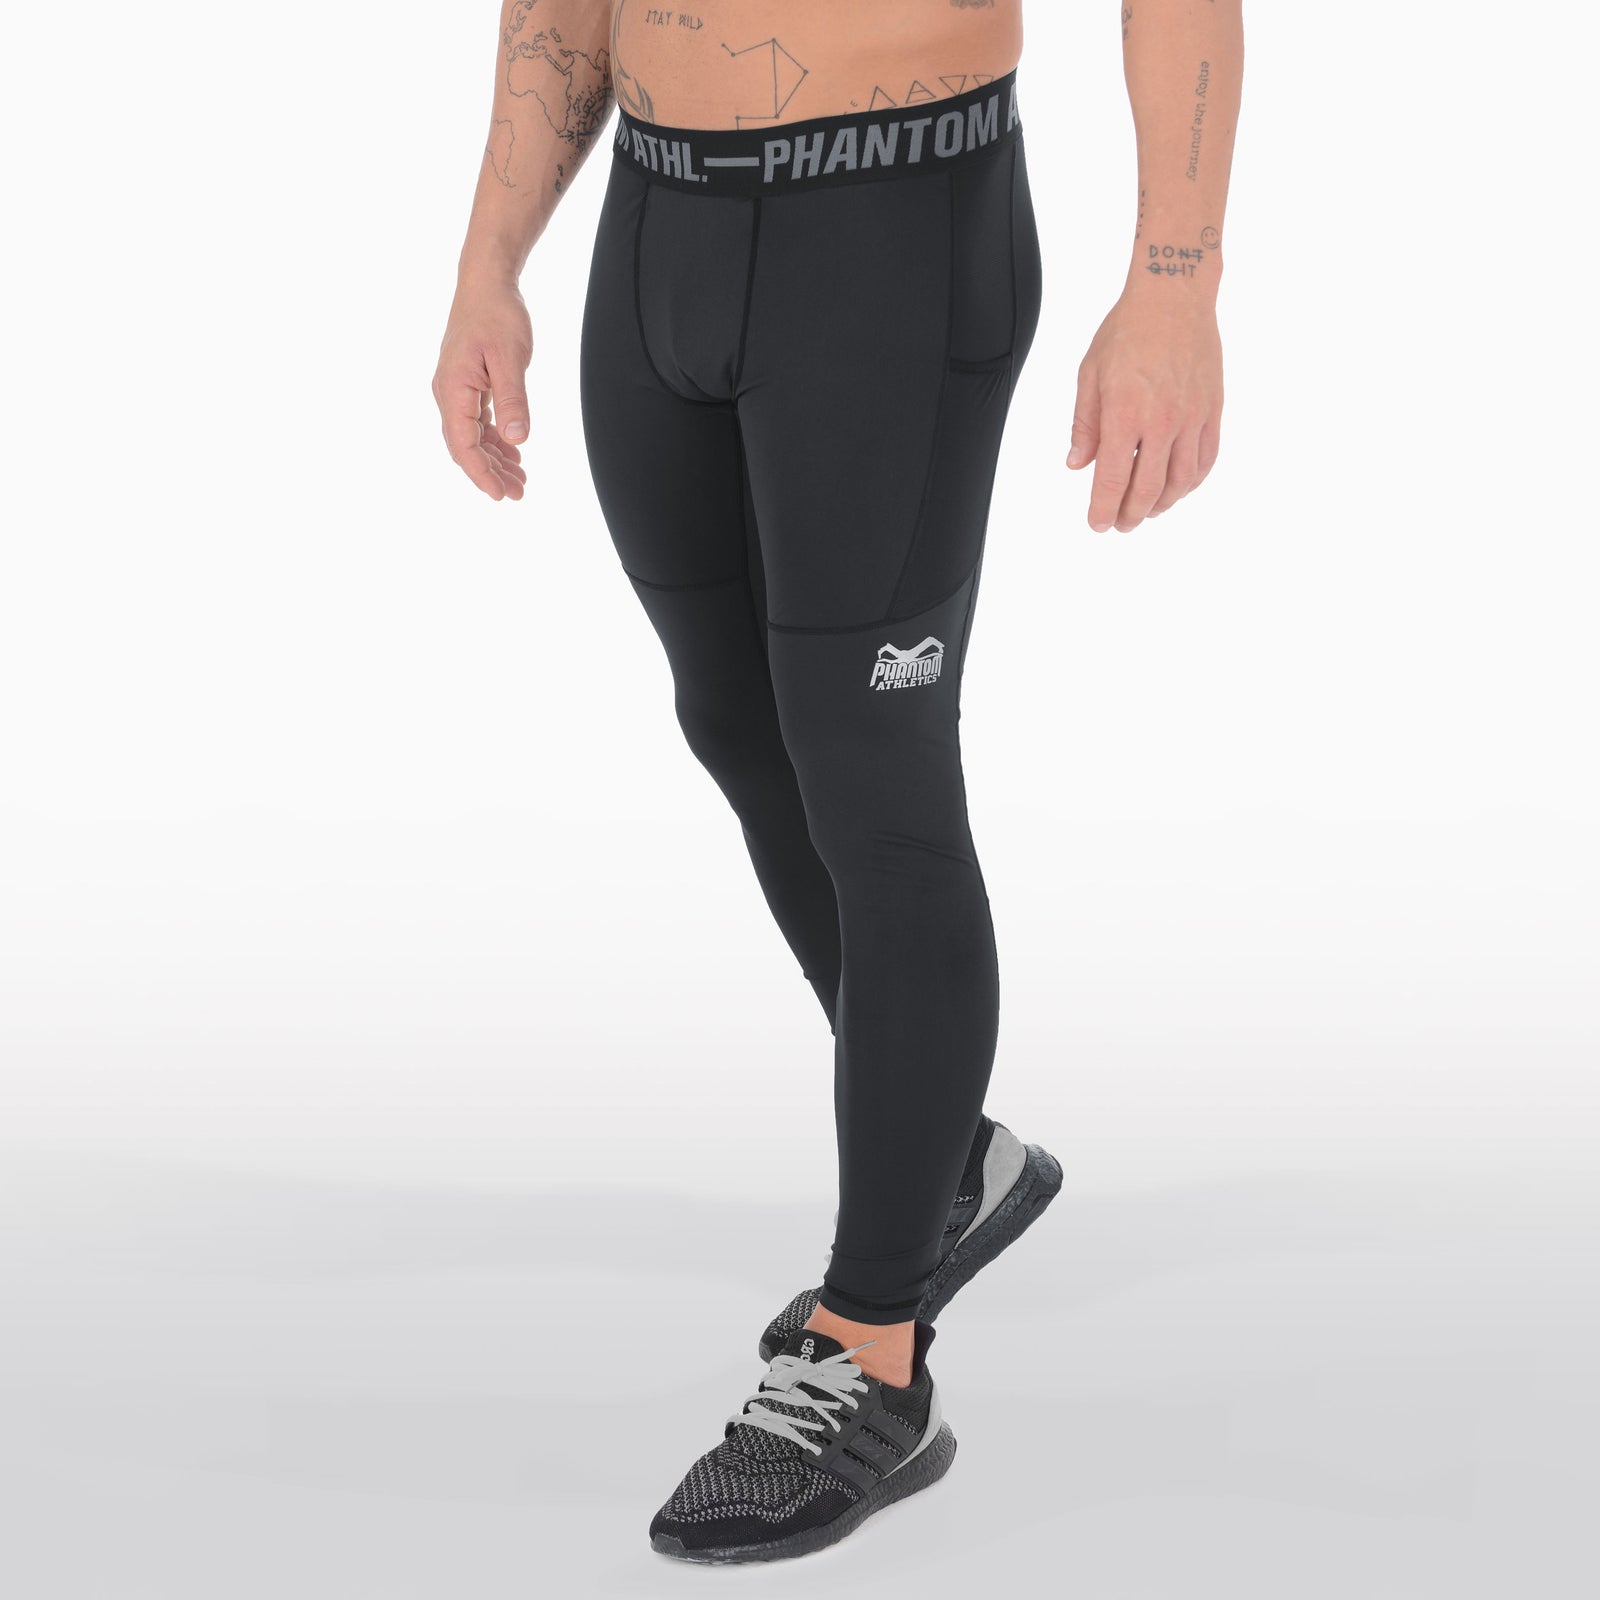 Buy SPORTINGER Compression Pants Tights Full Length Skins, Men's Legging,  Base Layer for Gym, Running, Swimming, Cricket, Cycling, Football, Yoga,  Basketball, Tennis, Badminton & More (L, Black) at Amazon.in